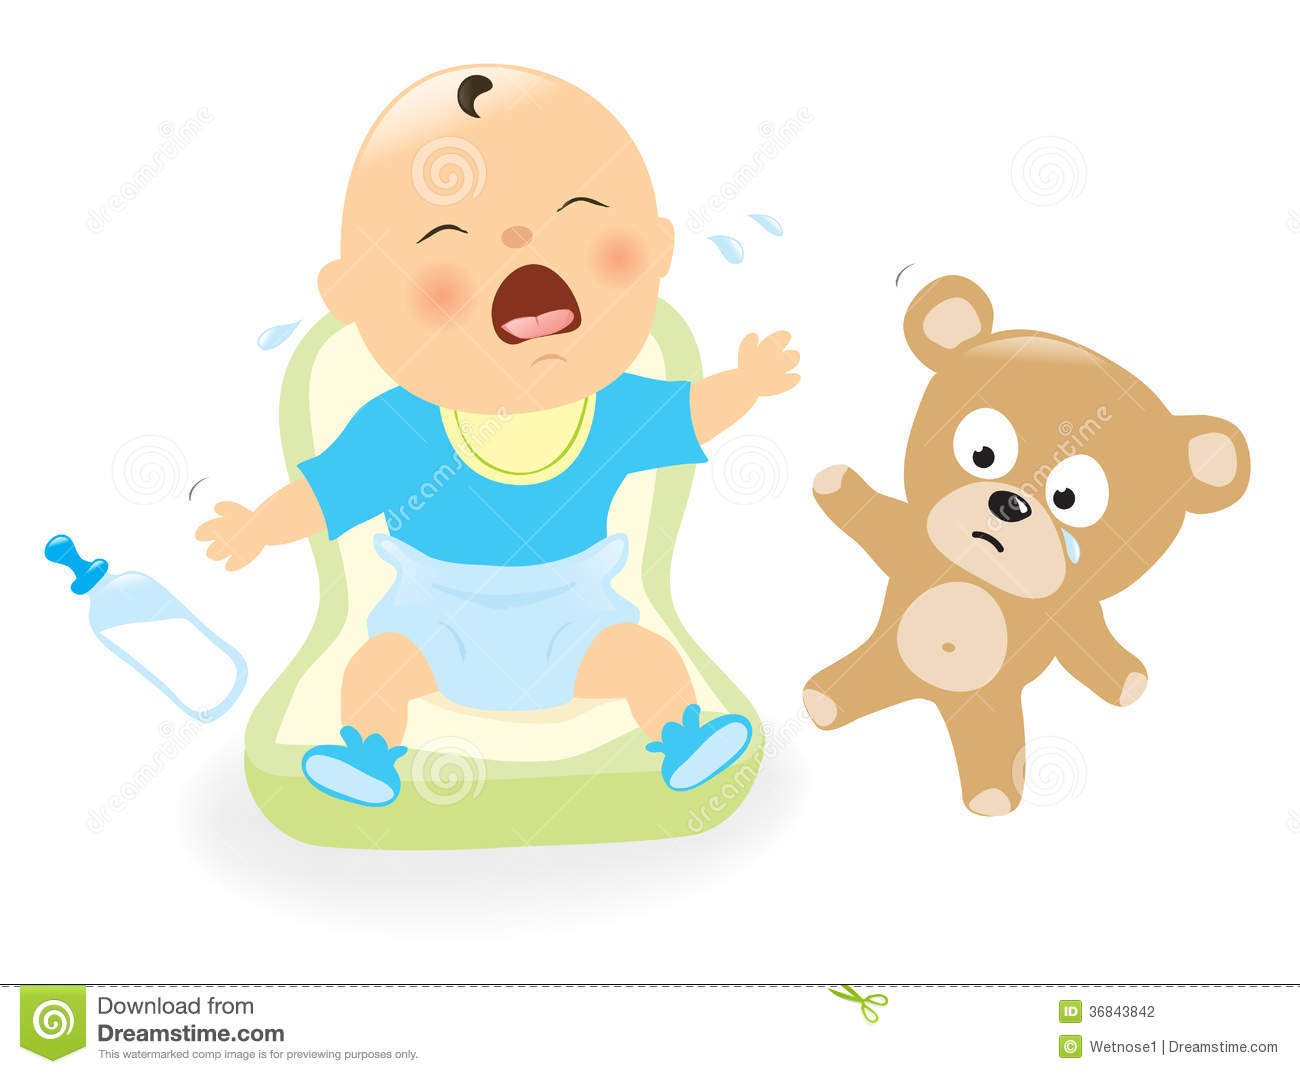 Illustration Of A Baby Crying And Sad Teddy Bear